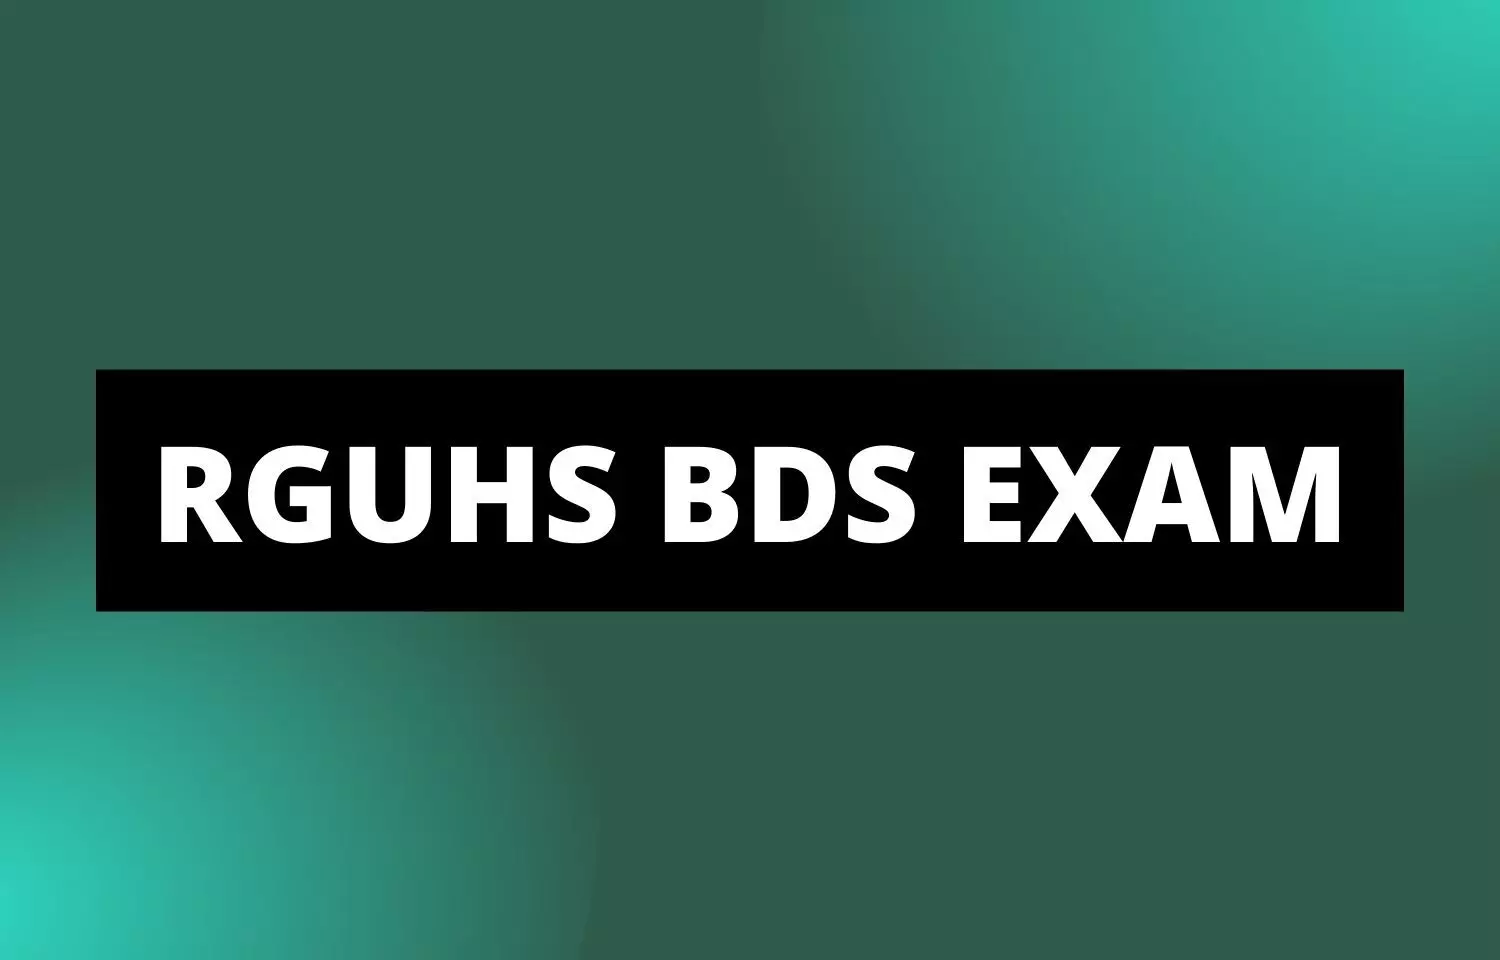 RGUHS releases conduct of BDS theory exams